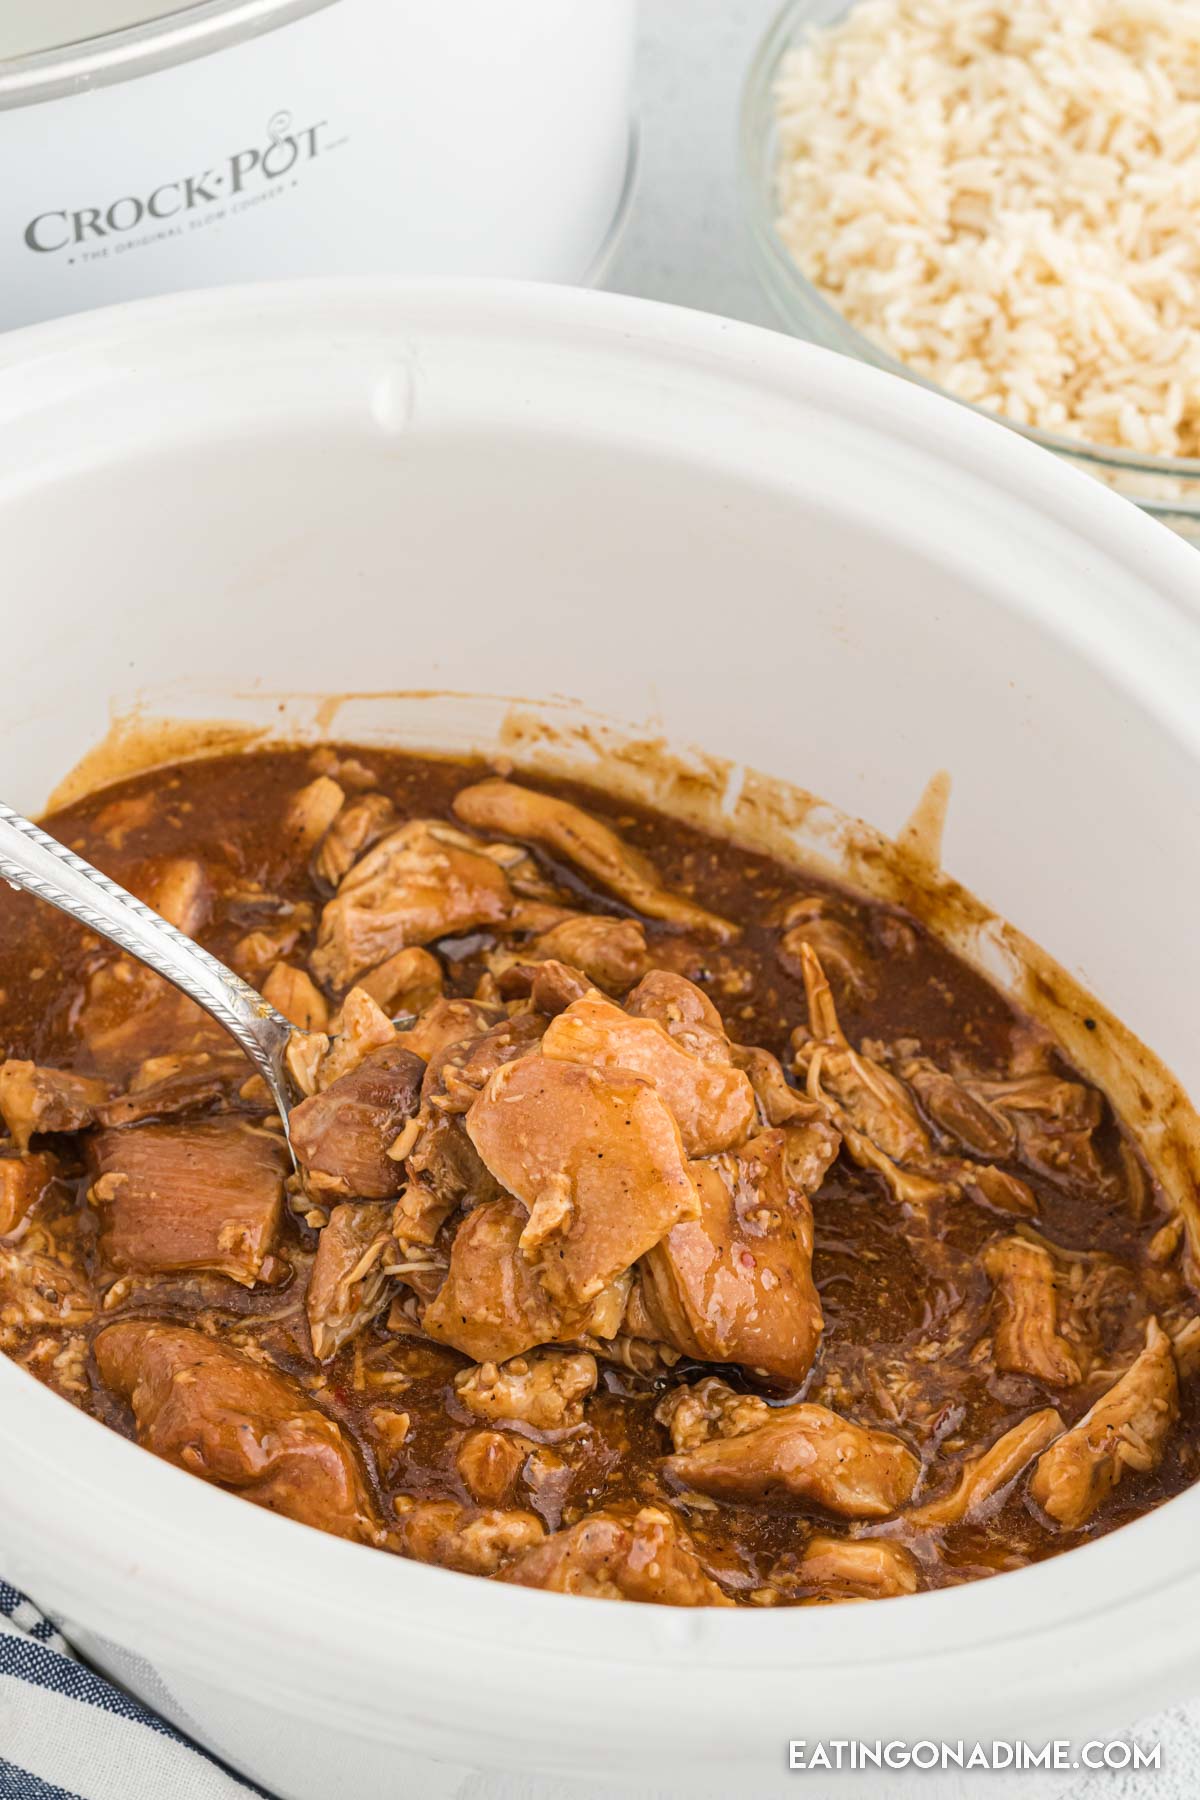 Bourbon Chicken in a crock pot with a serving on a spoon